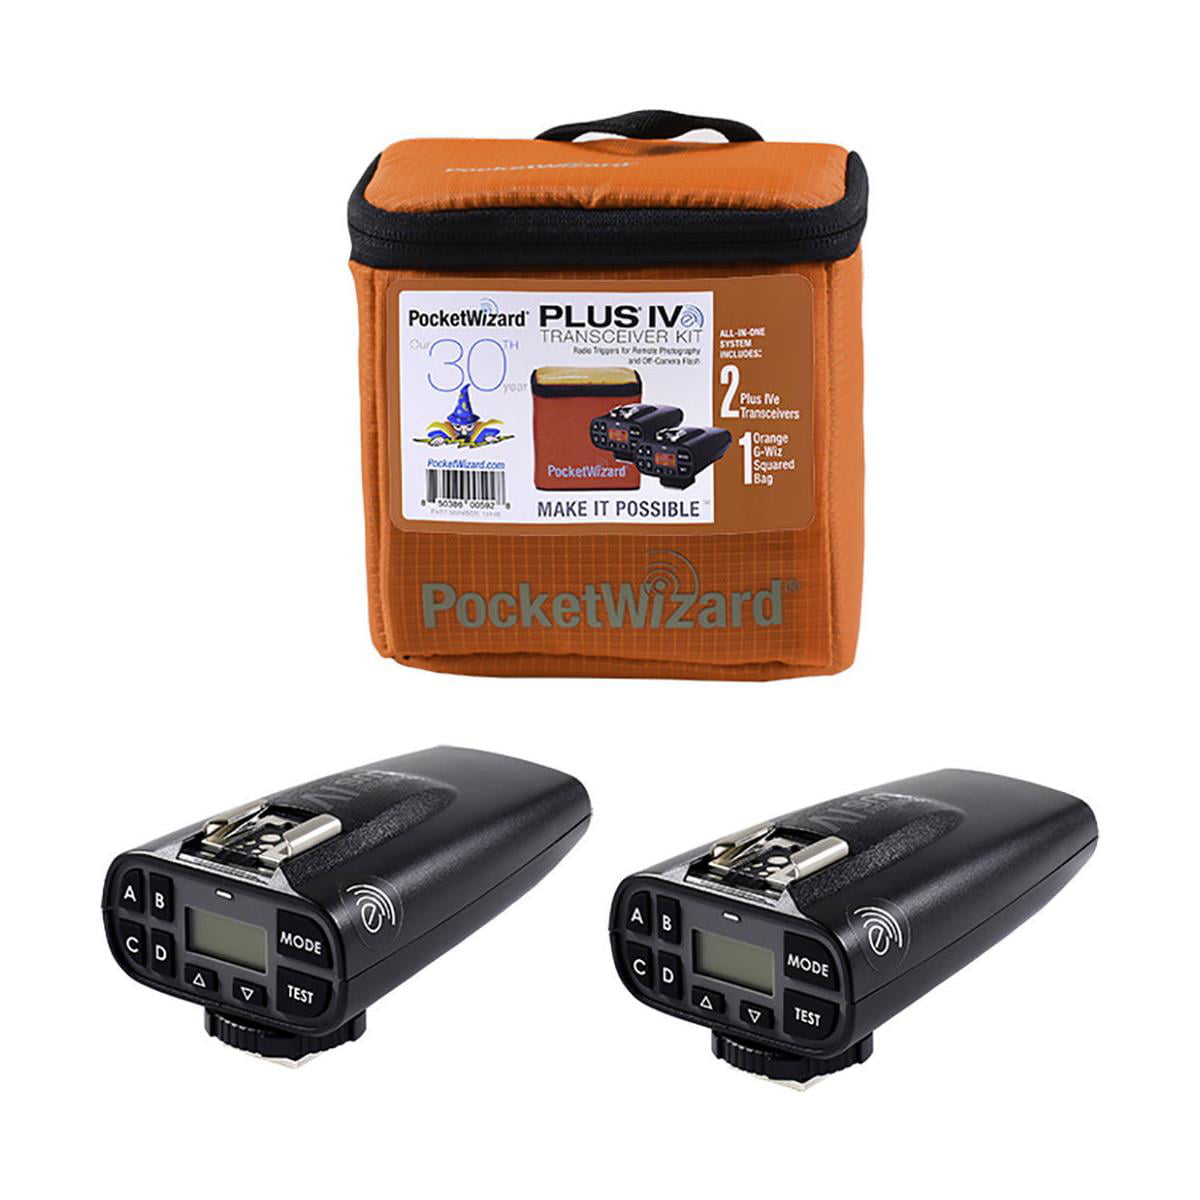 PocketWizard Plus IVe Transceiver Kit, Includes 2x Plus IVe Transceivers  with G-Wiz Squared Bag